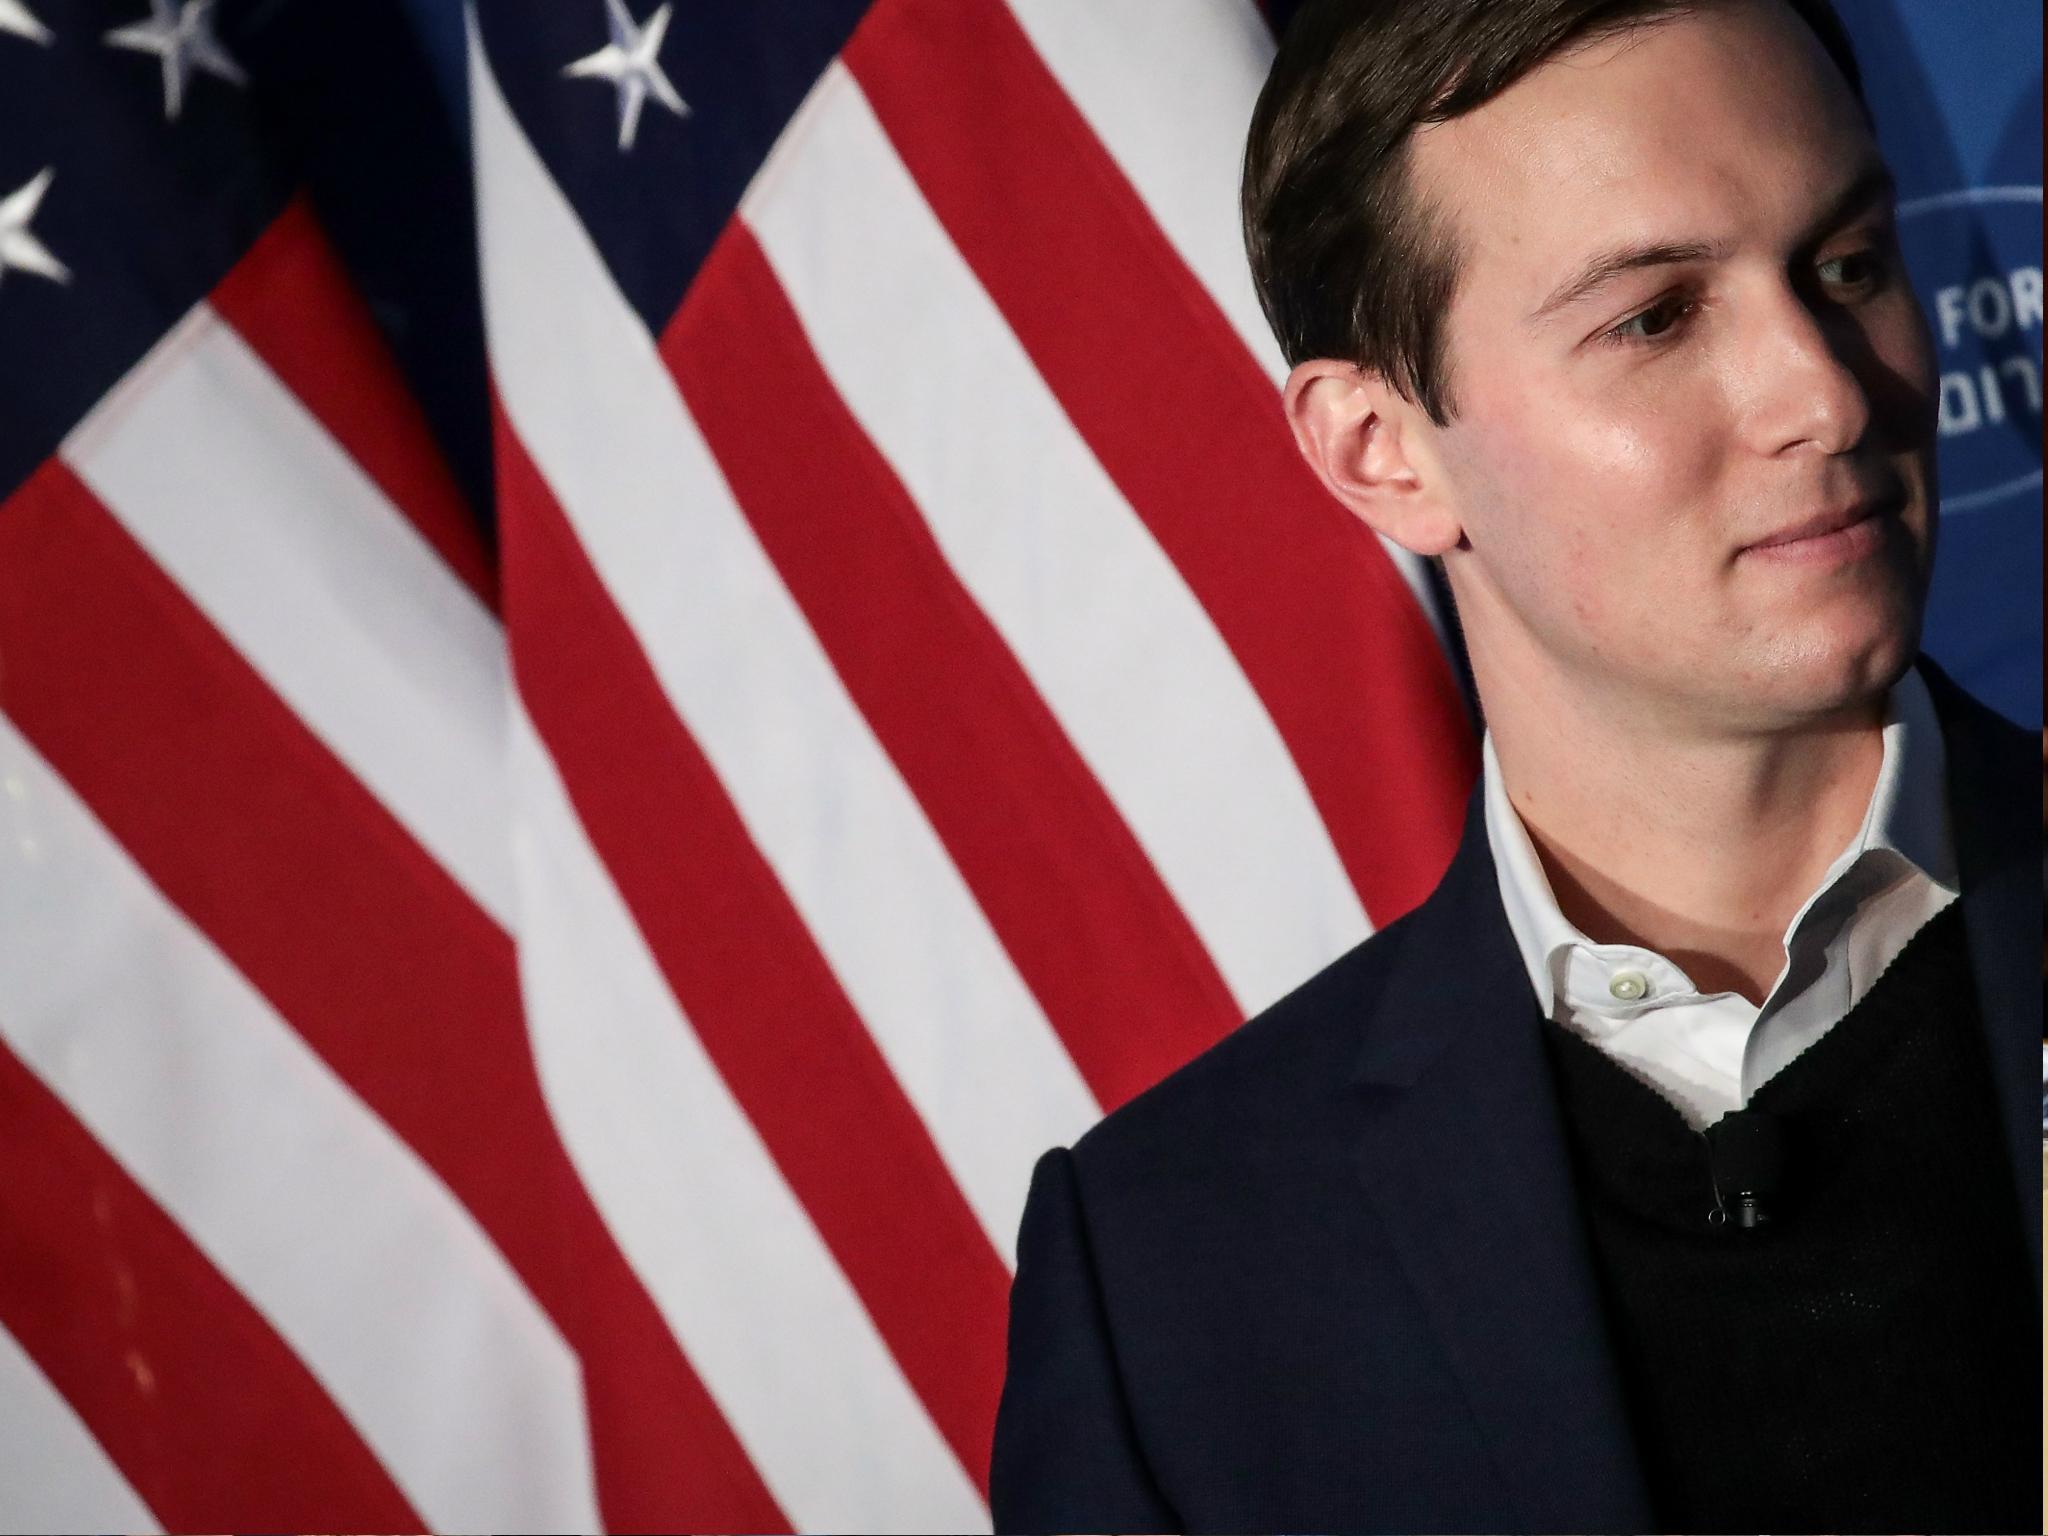 White House Senior Advisor to the President Jared Kushner travelled to Mexico to meet leaders there without including the US Ambassador